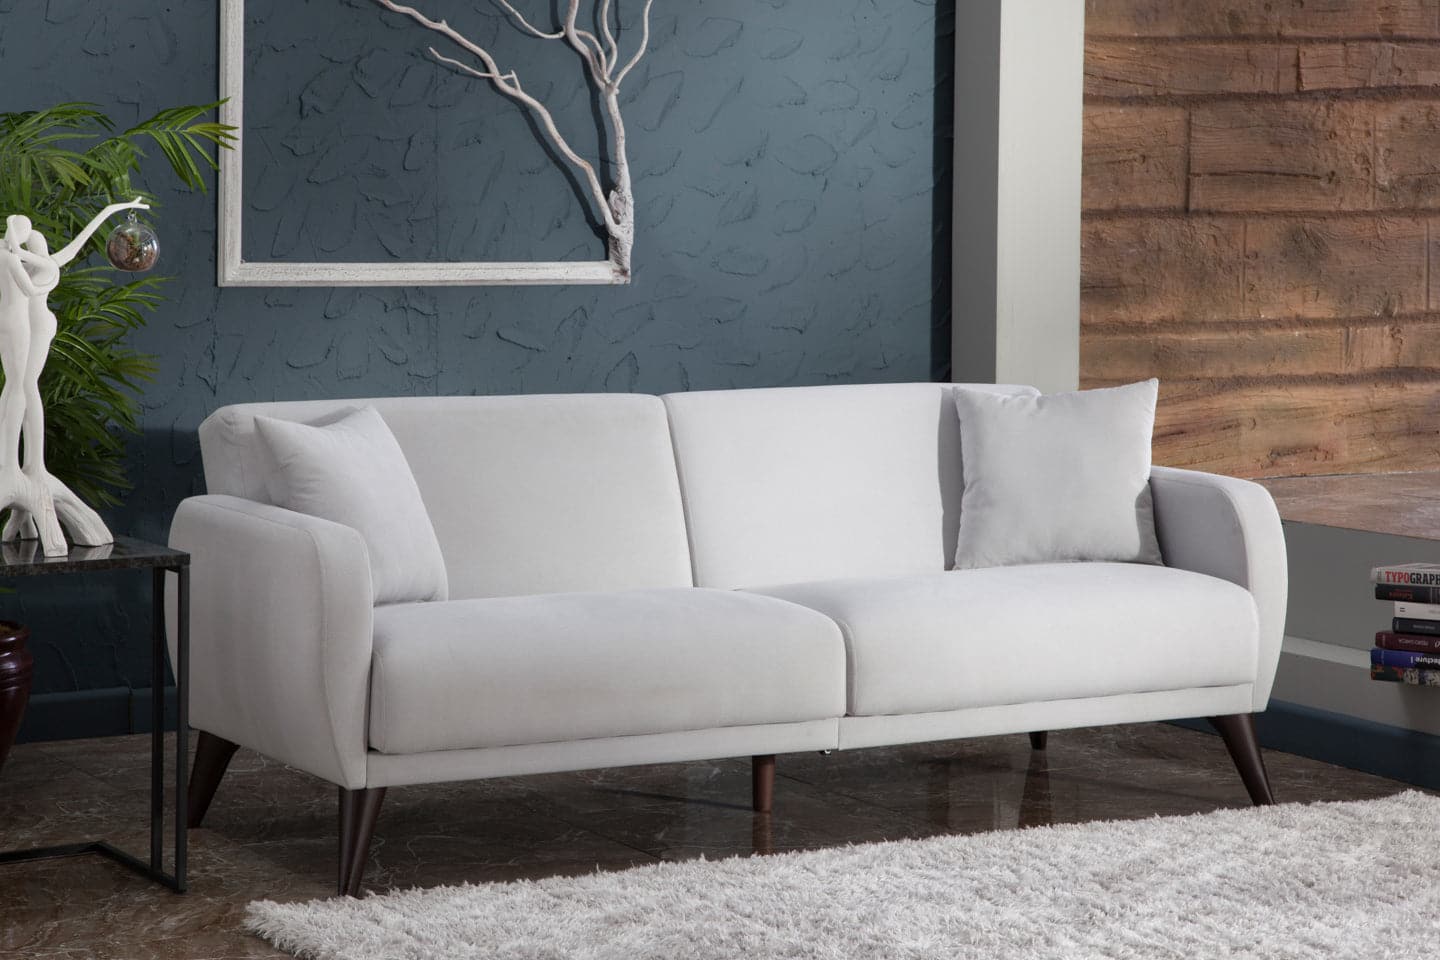 Flexy Sofa In A Box - Taupe